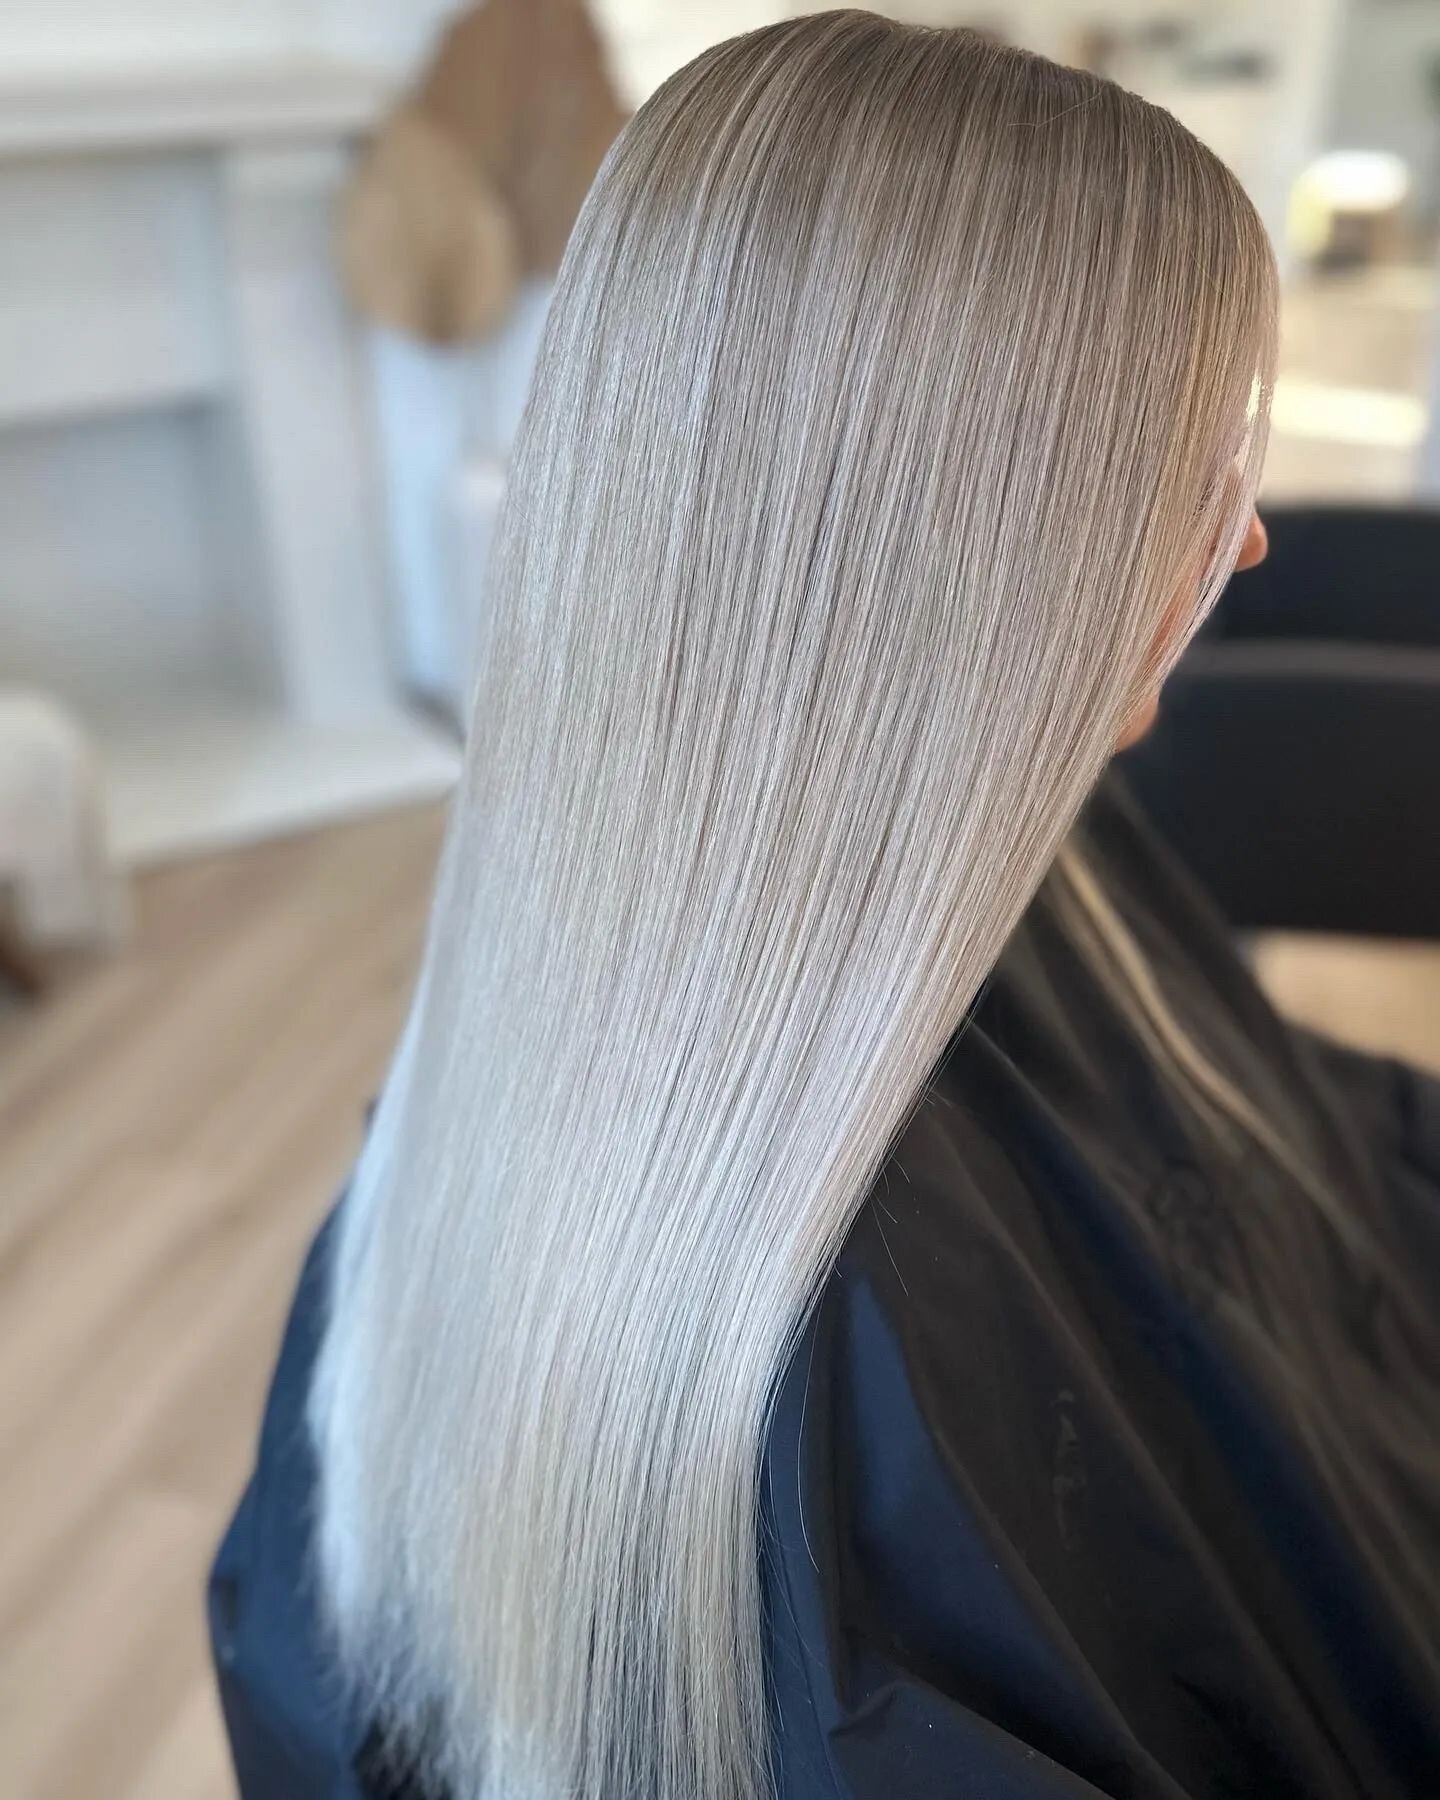 Straight blends are always so satisfying!! Brittney created this beauty! ⁣
⁣
@salonclutch ⁣
⁣
If you'd like to book with Britt you can find her contact info in the highlights section under her name! ⁣
⁣
For general inquiries:⁣
📞 705-209-6729⁣
✉️ ble